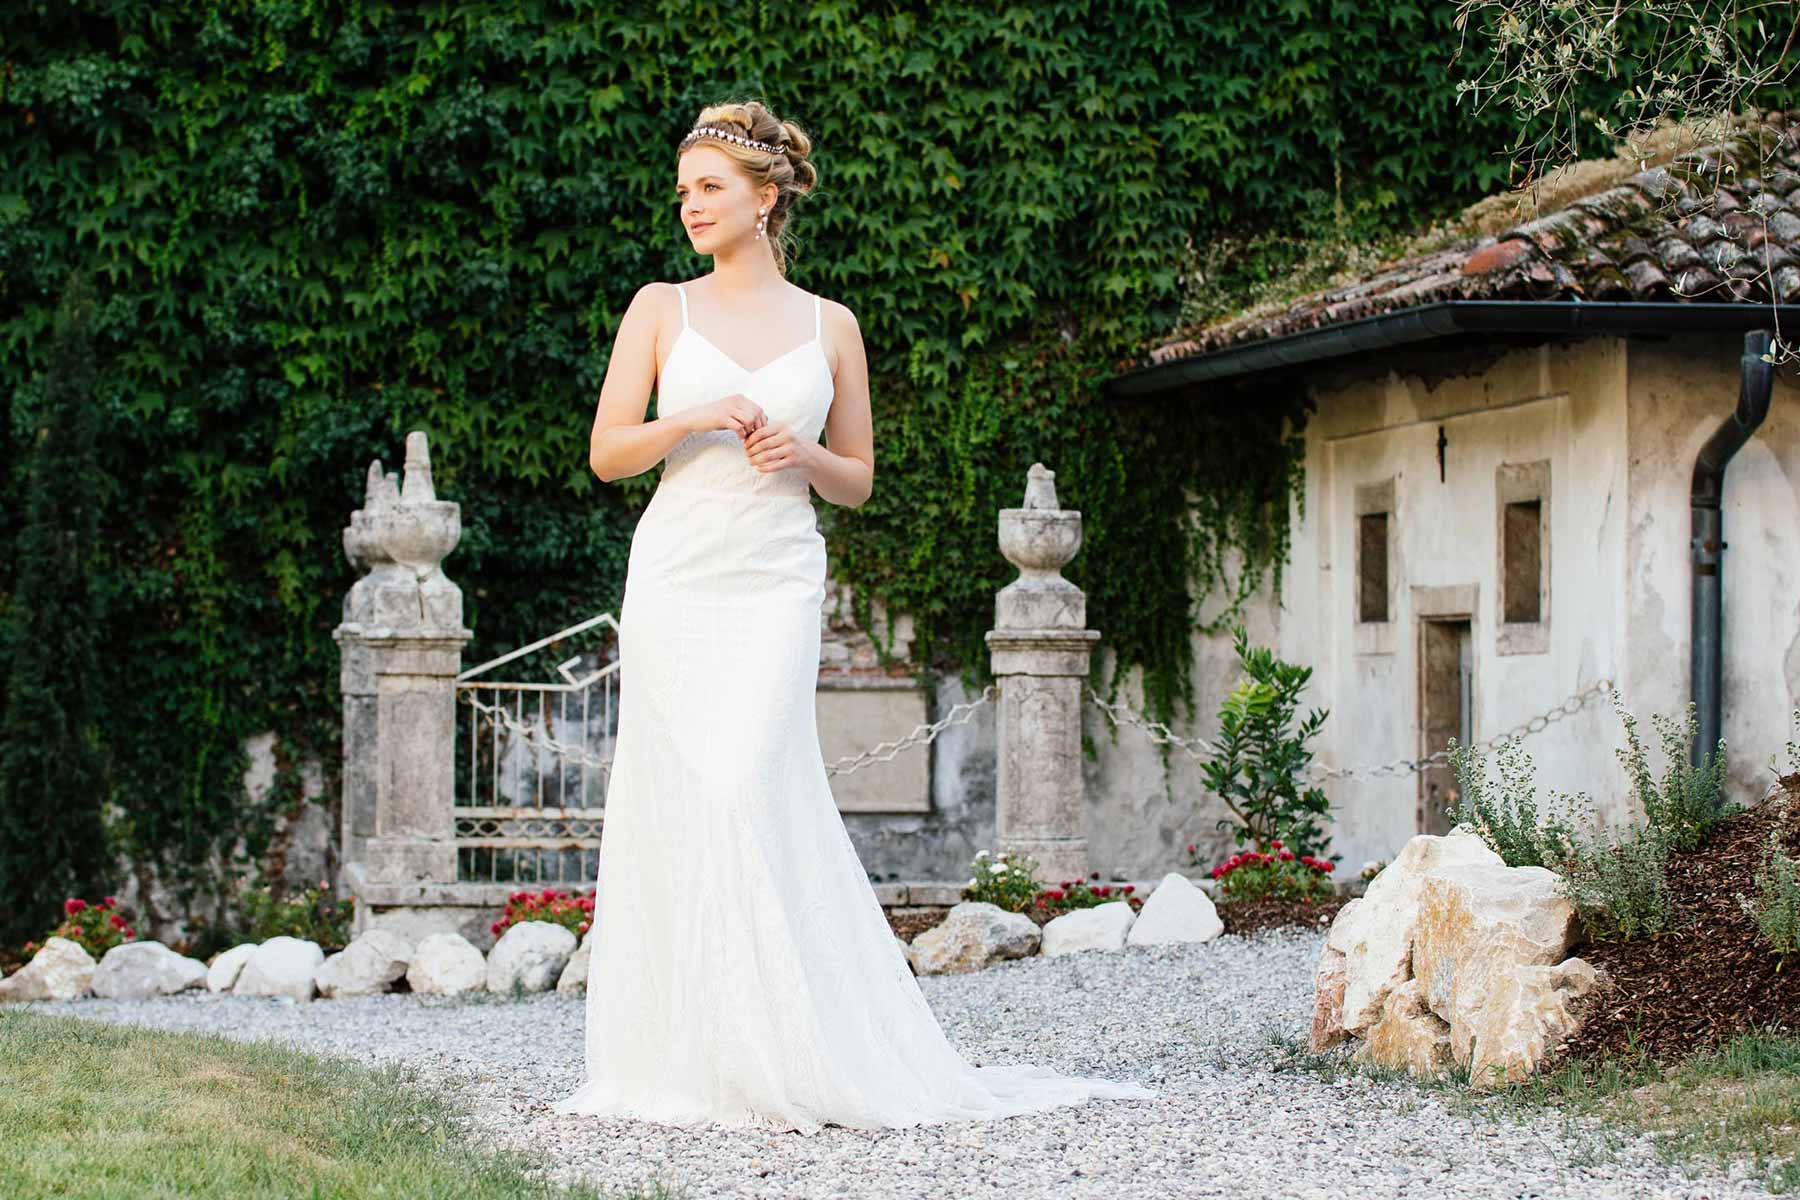 5 things to look out for in your wedding dress